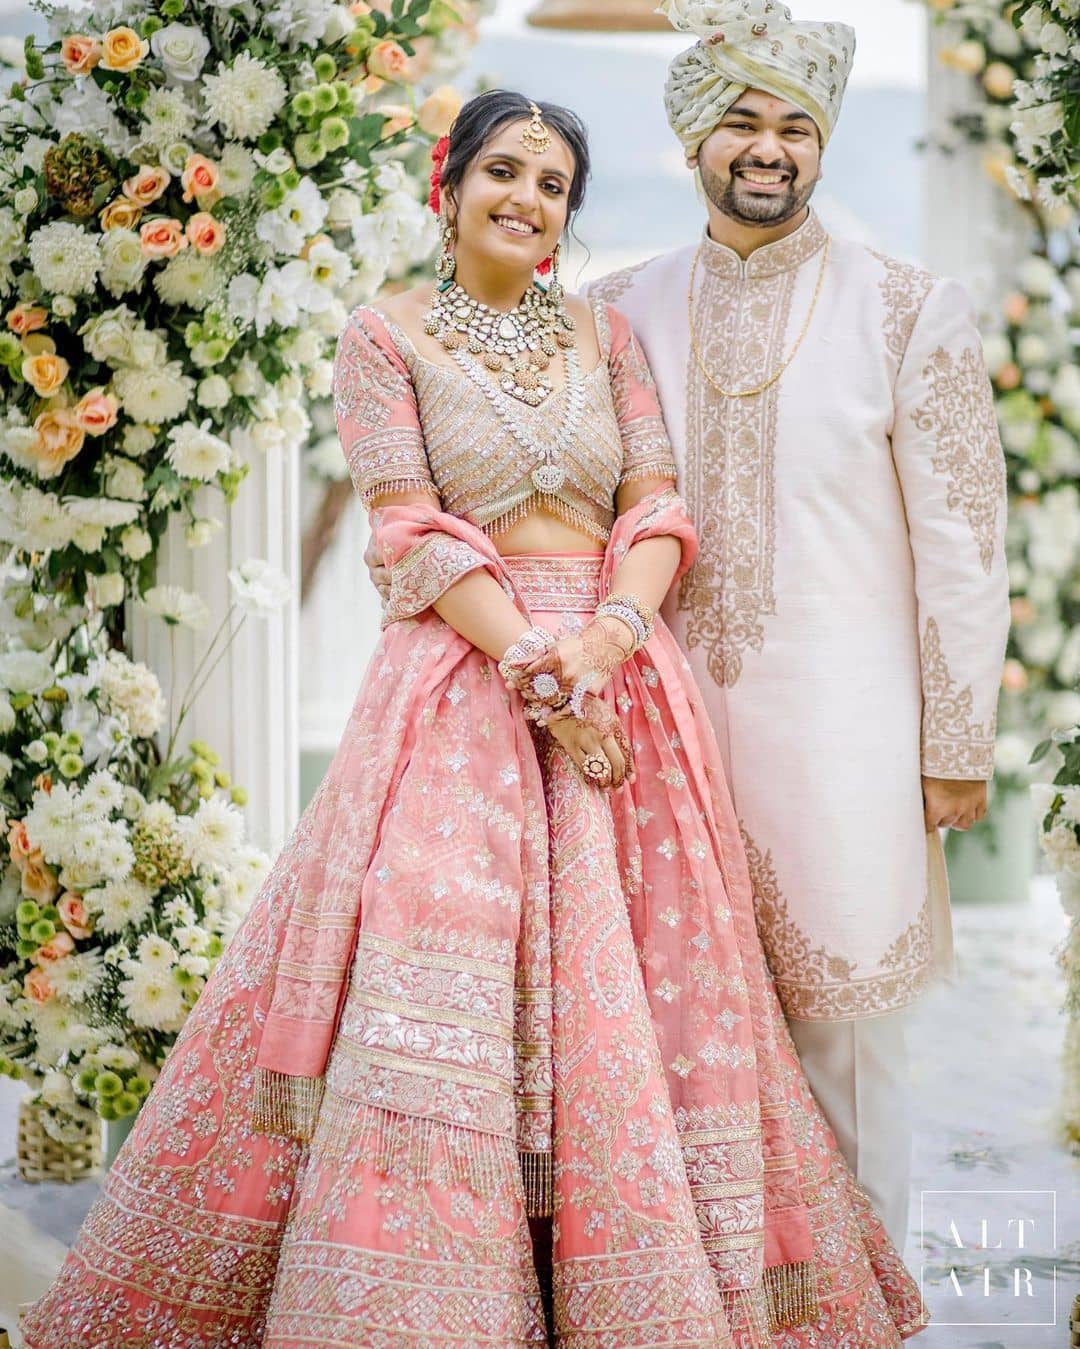 Best Lehengas without Straining Your Budget, and in a Design that will Wow  the People around You, Here are Some of the Most Brilliant and Best designer  Lehenga under 3,000.